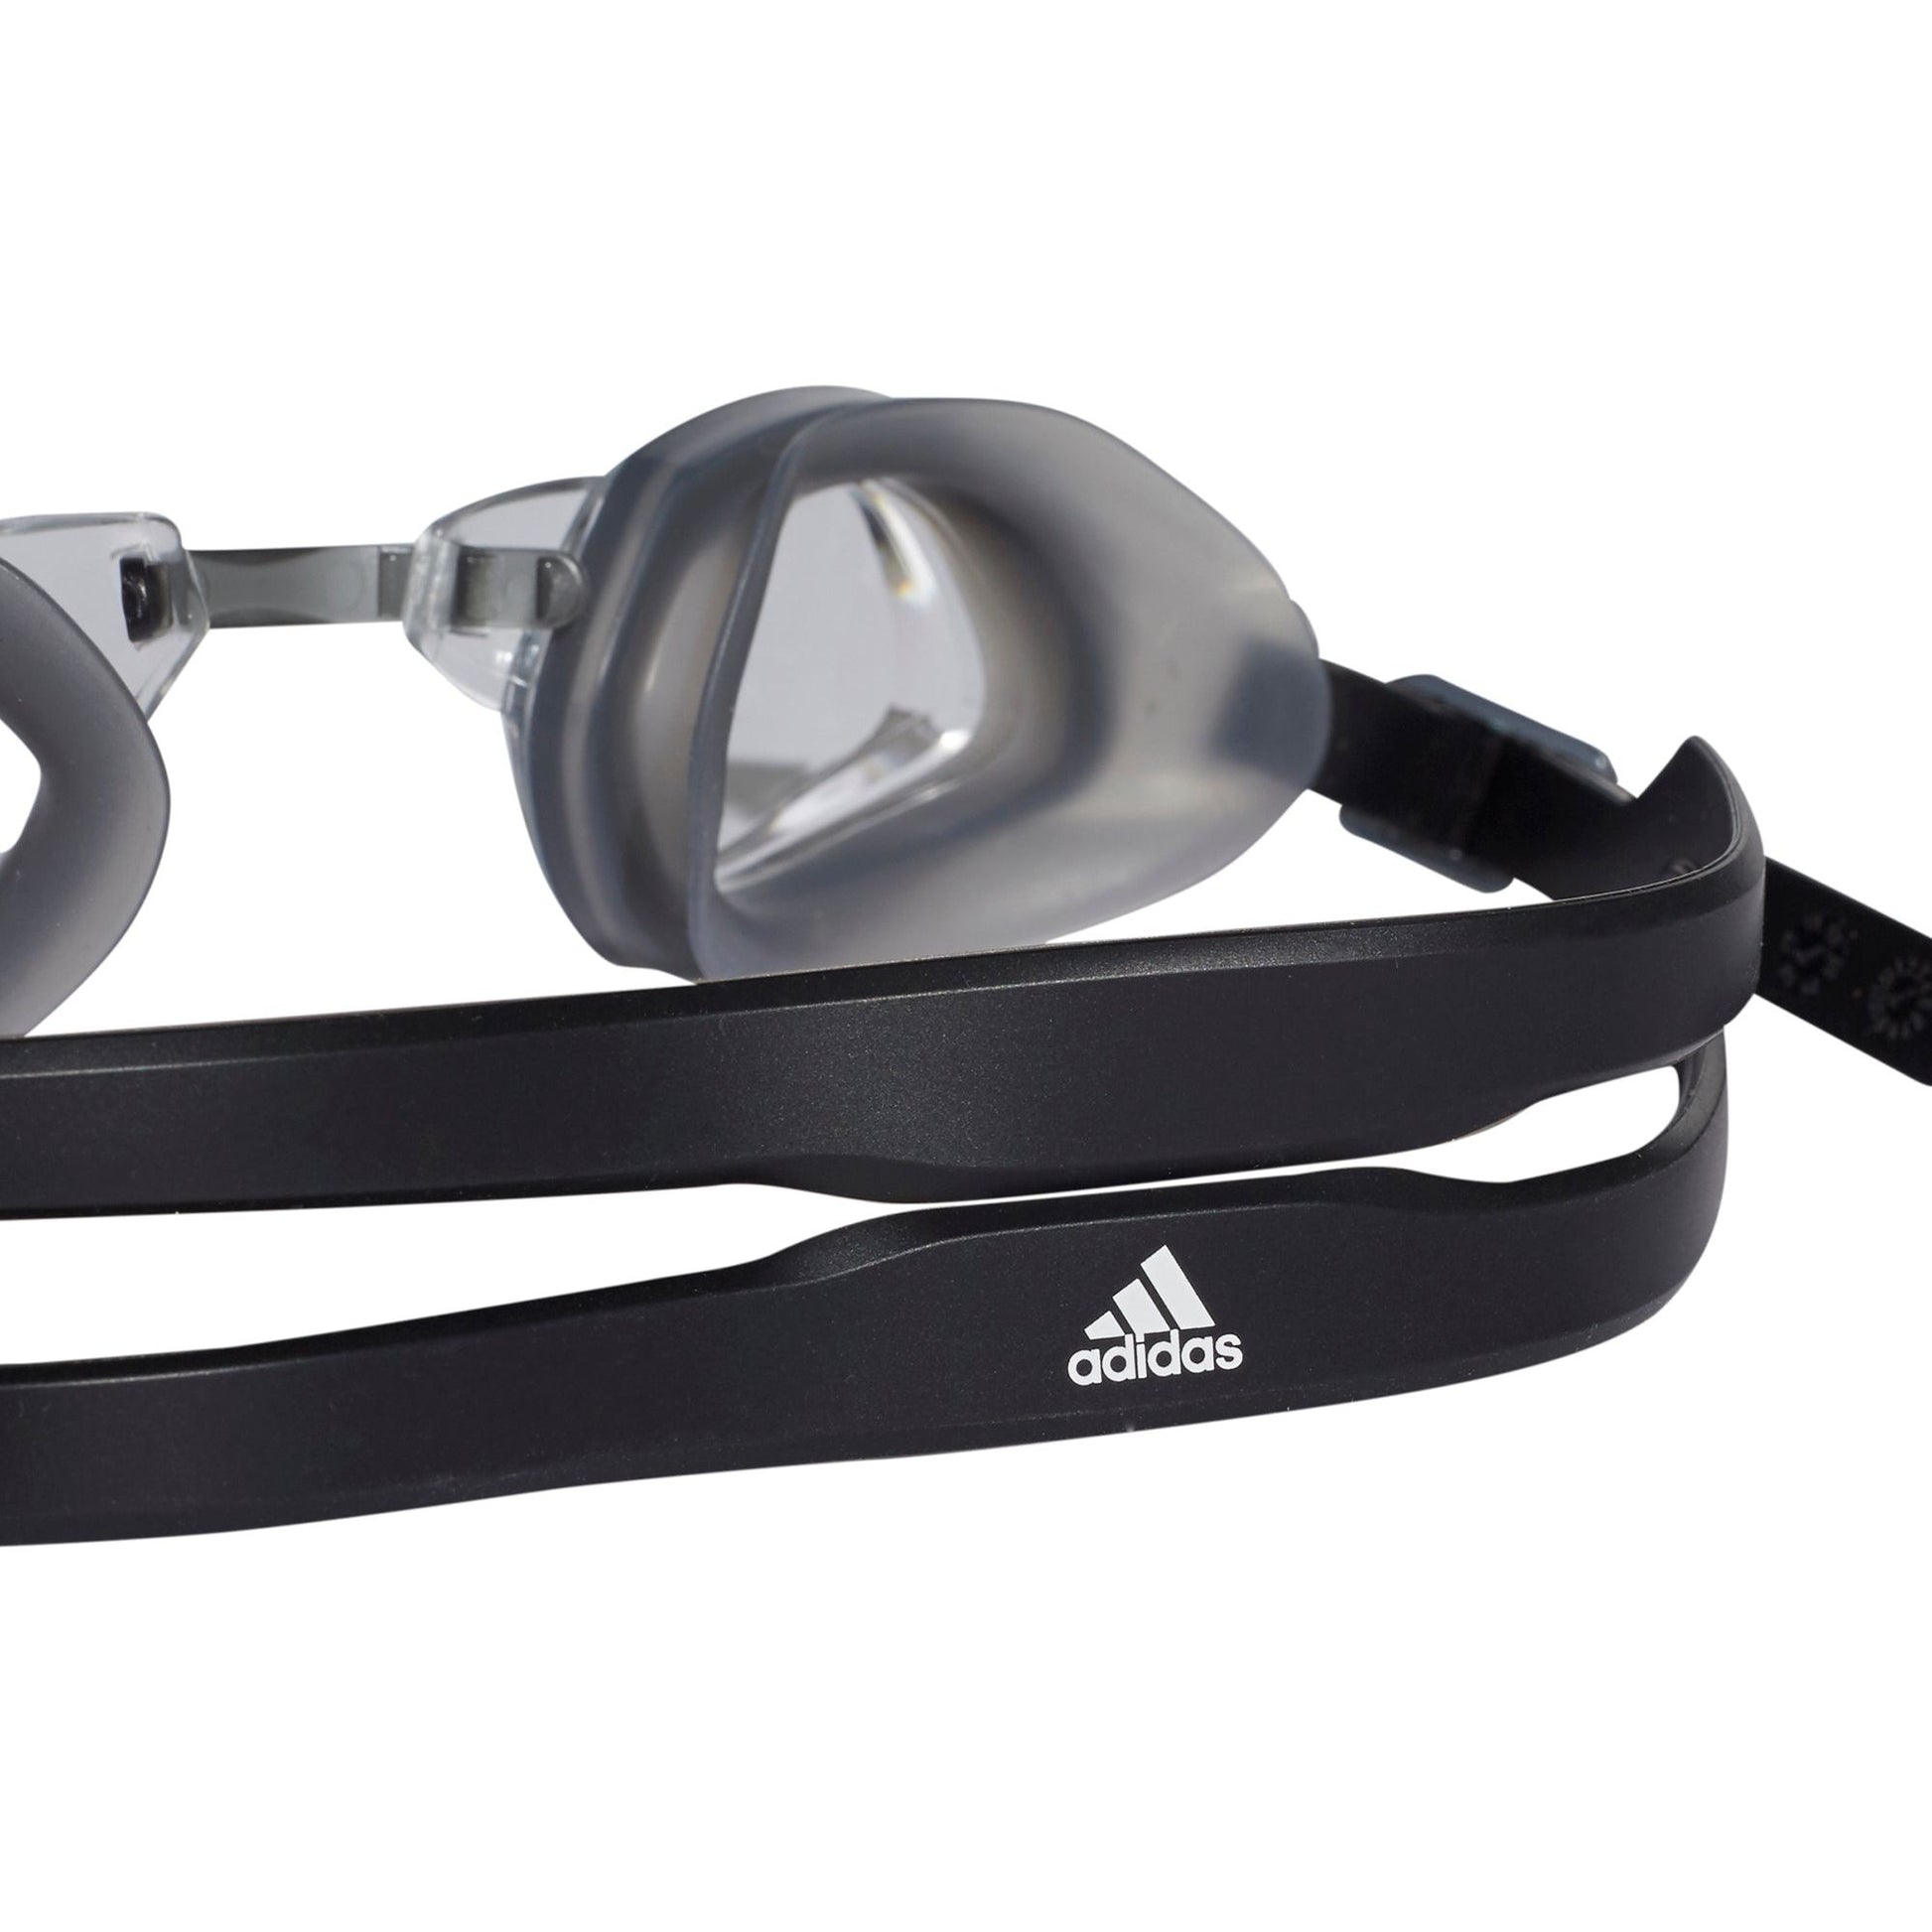 Adidas Persistar Fit Swimming Goggles Br1065 Details